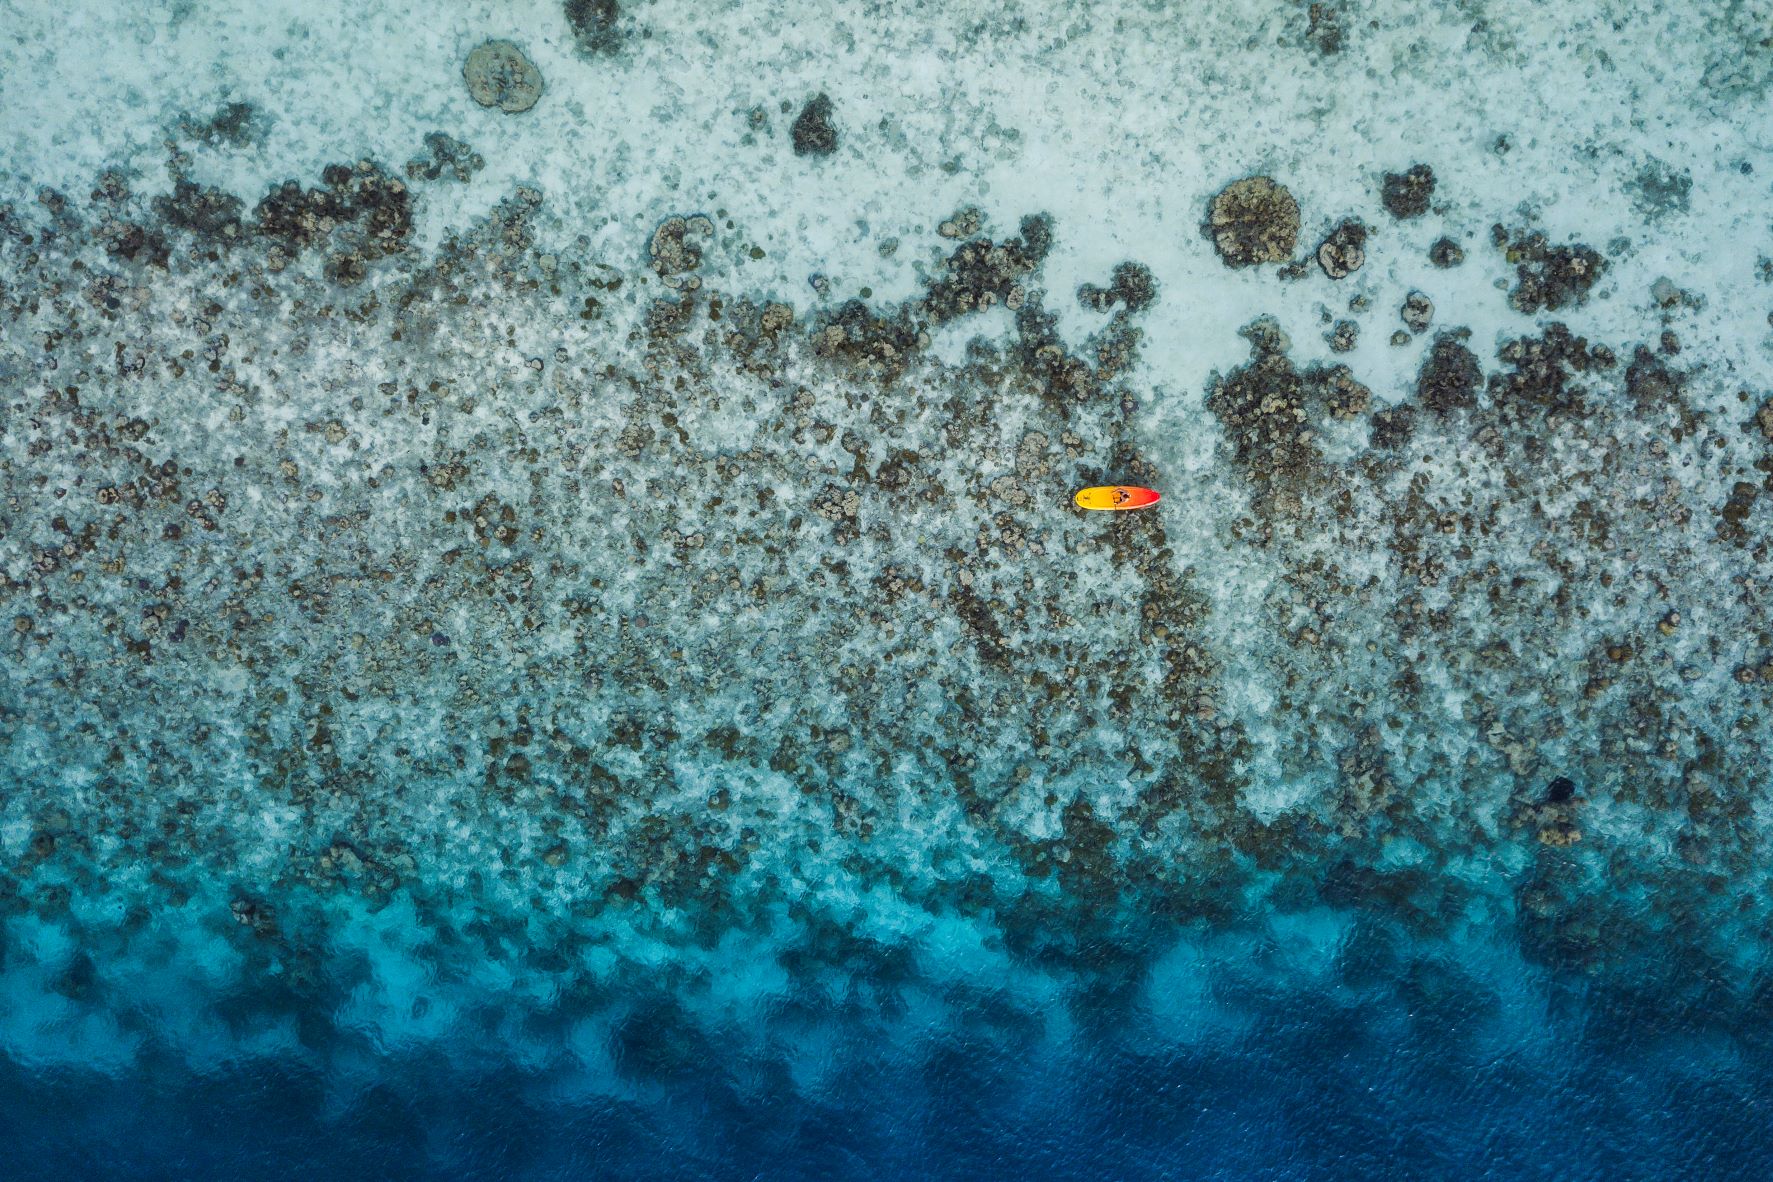 Paddleboarder from above